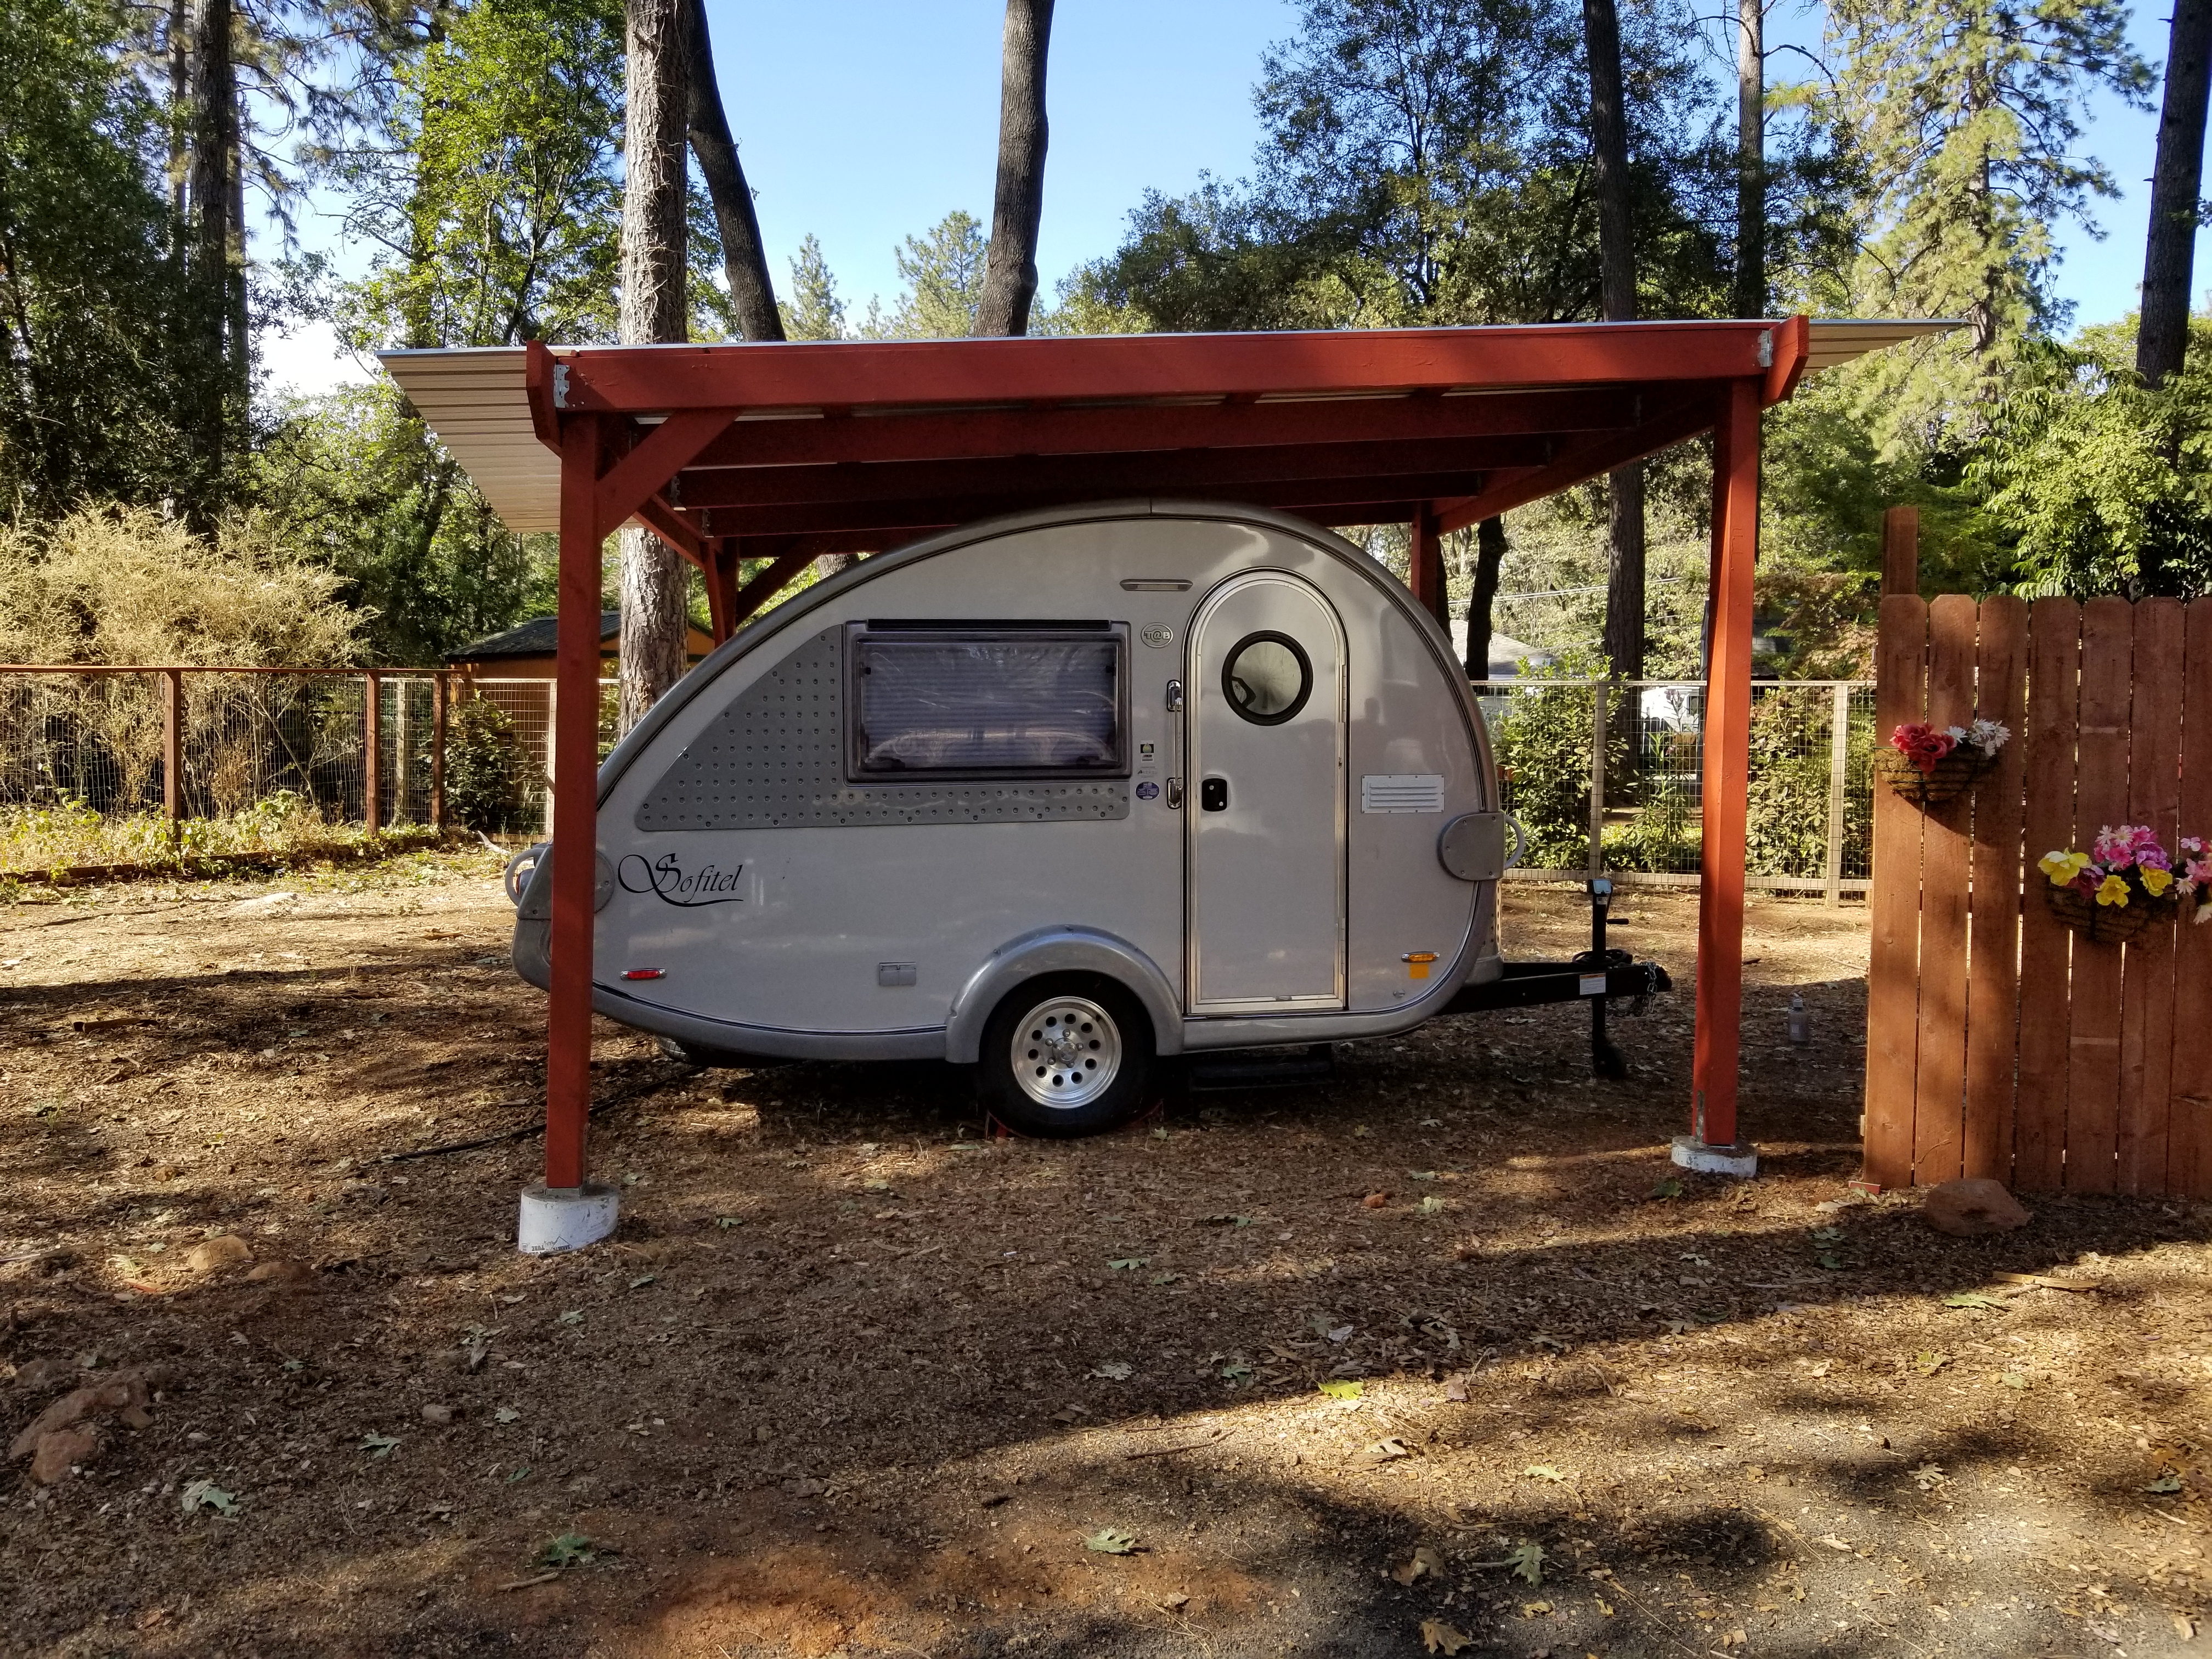 Small tear drop travel trailer before the Camp Fire